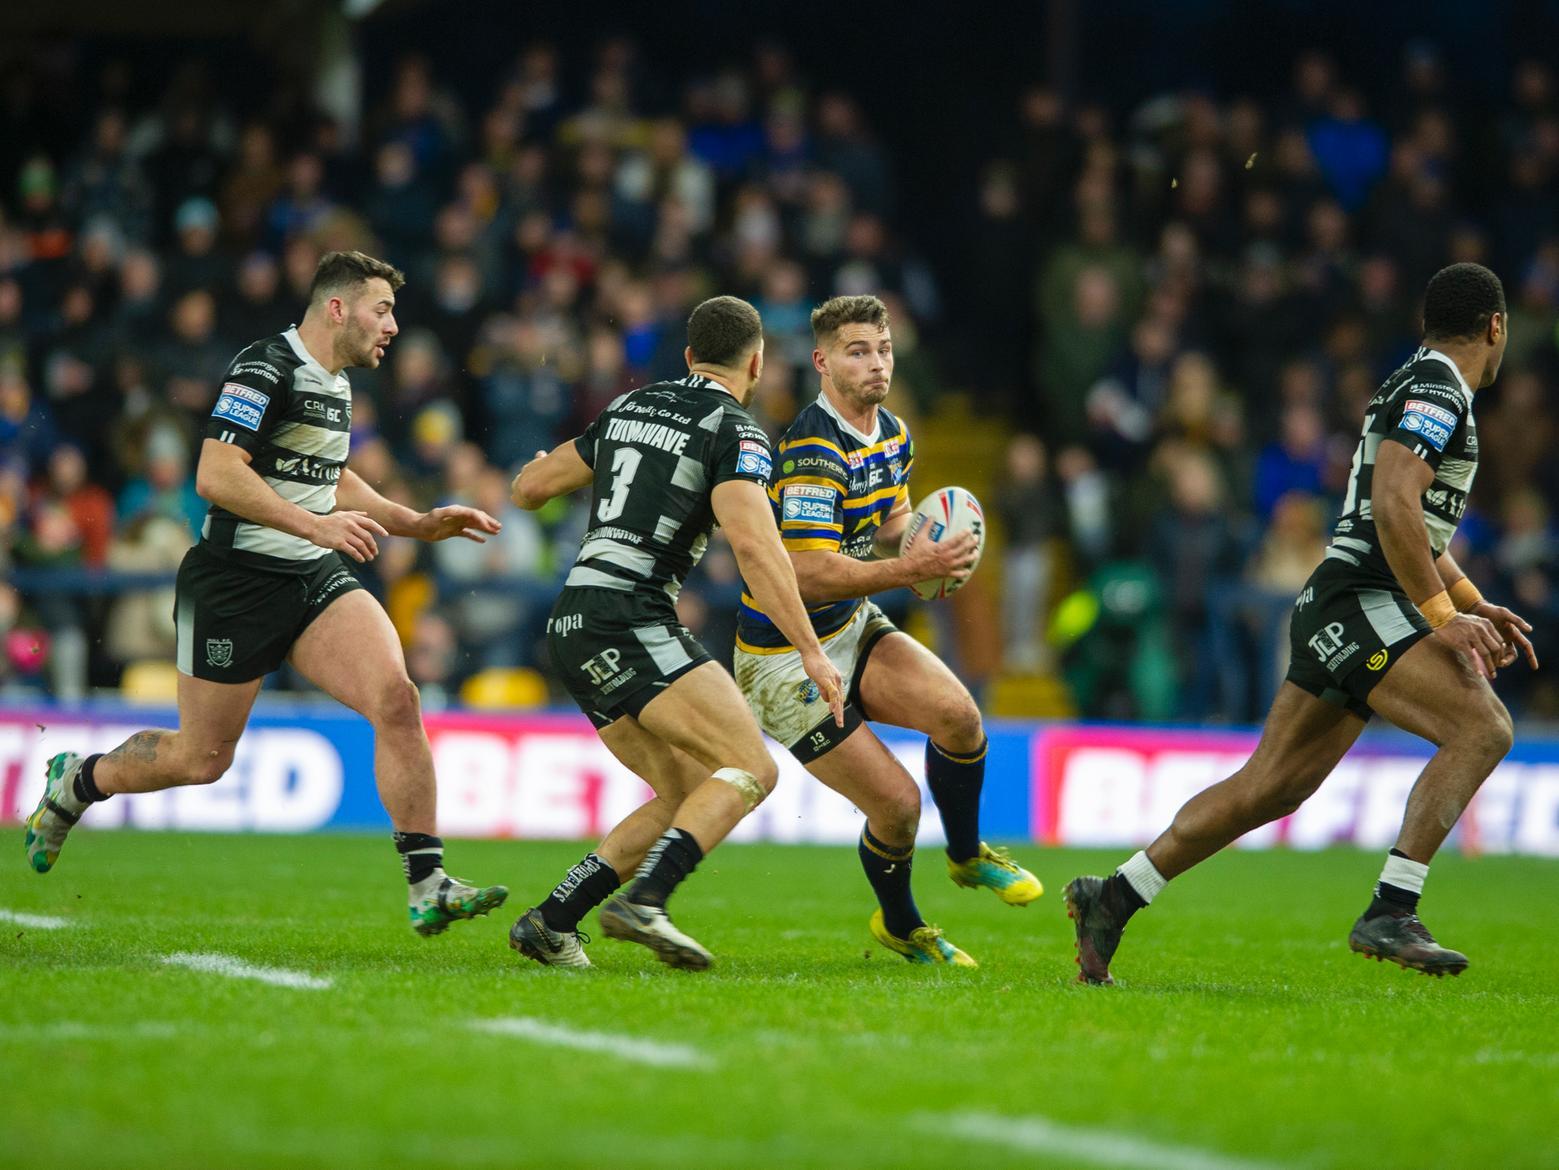 Stevie Ward in possession for Rhinos. Picture by Tony Johnson.